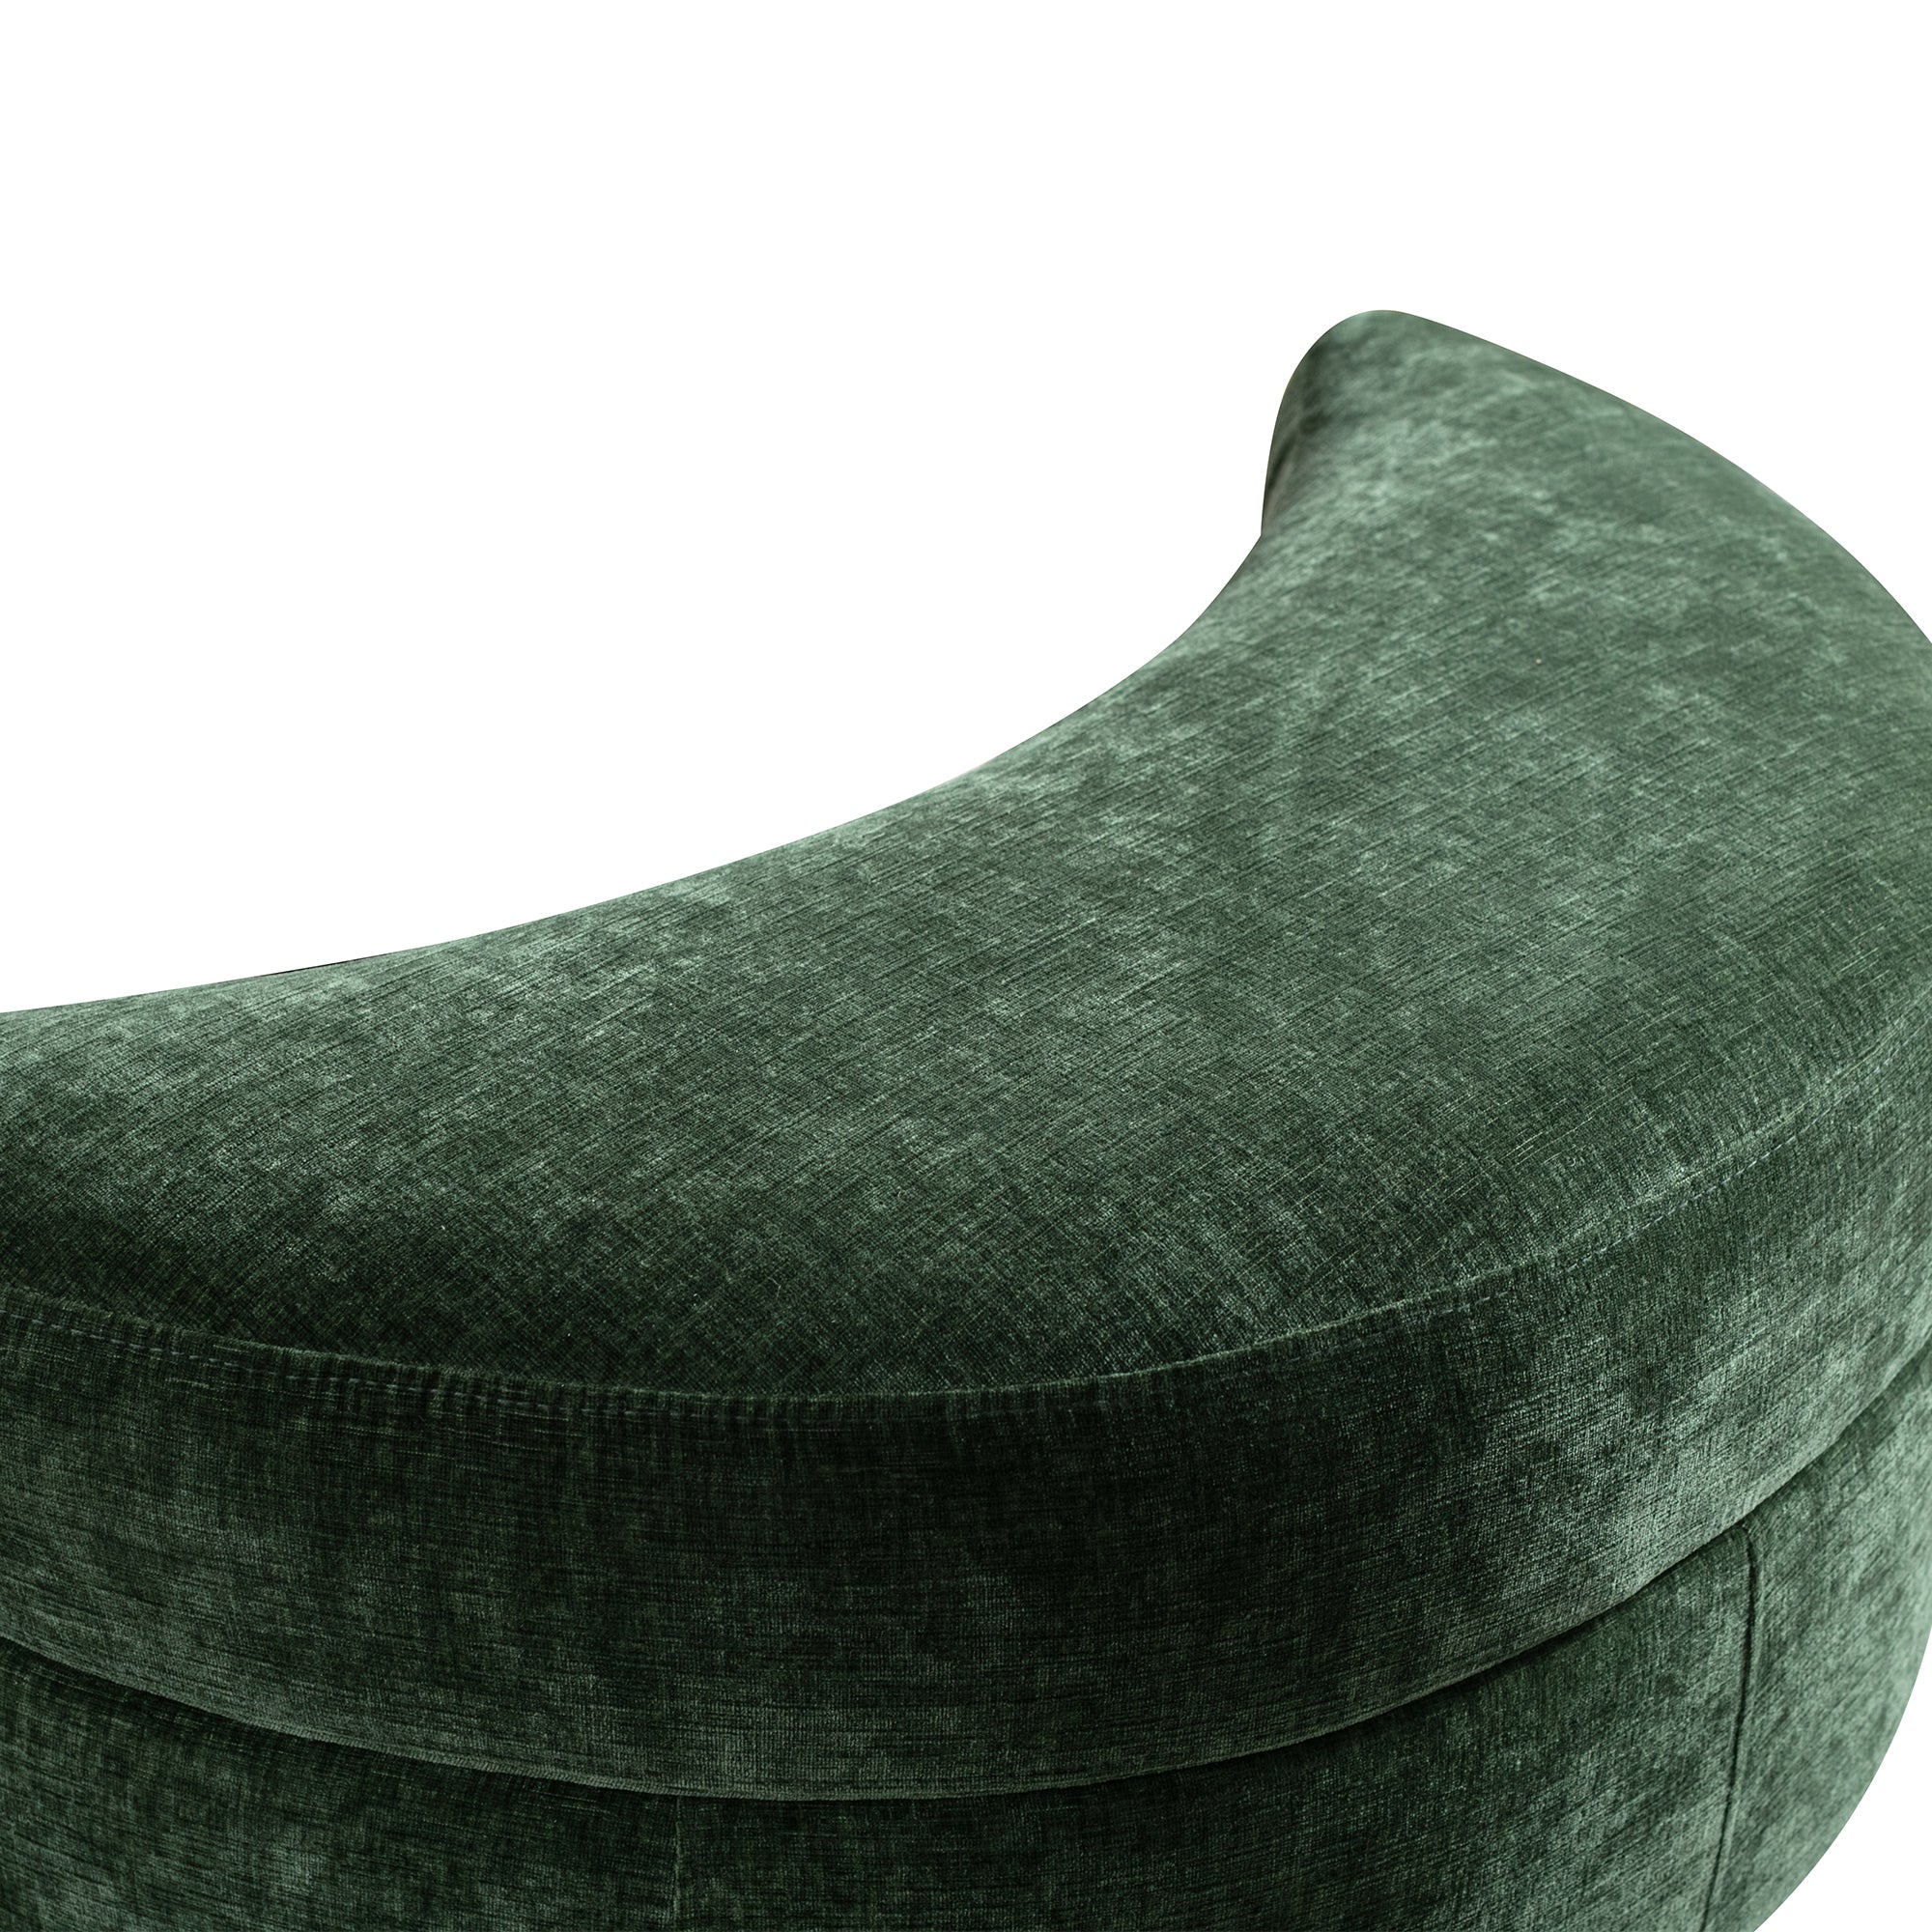 NOBLEMOOD 32.7" W Half Crescent Moon Storage Bench Large Upholstered Sofa Ottoman w/ Tray Serve for Living Room, Entryway, Hallway（Green）